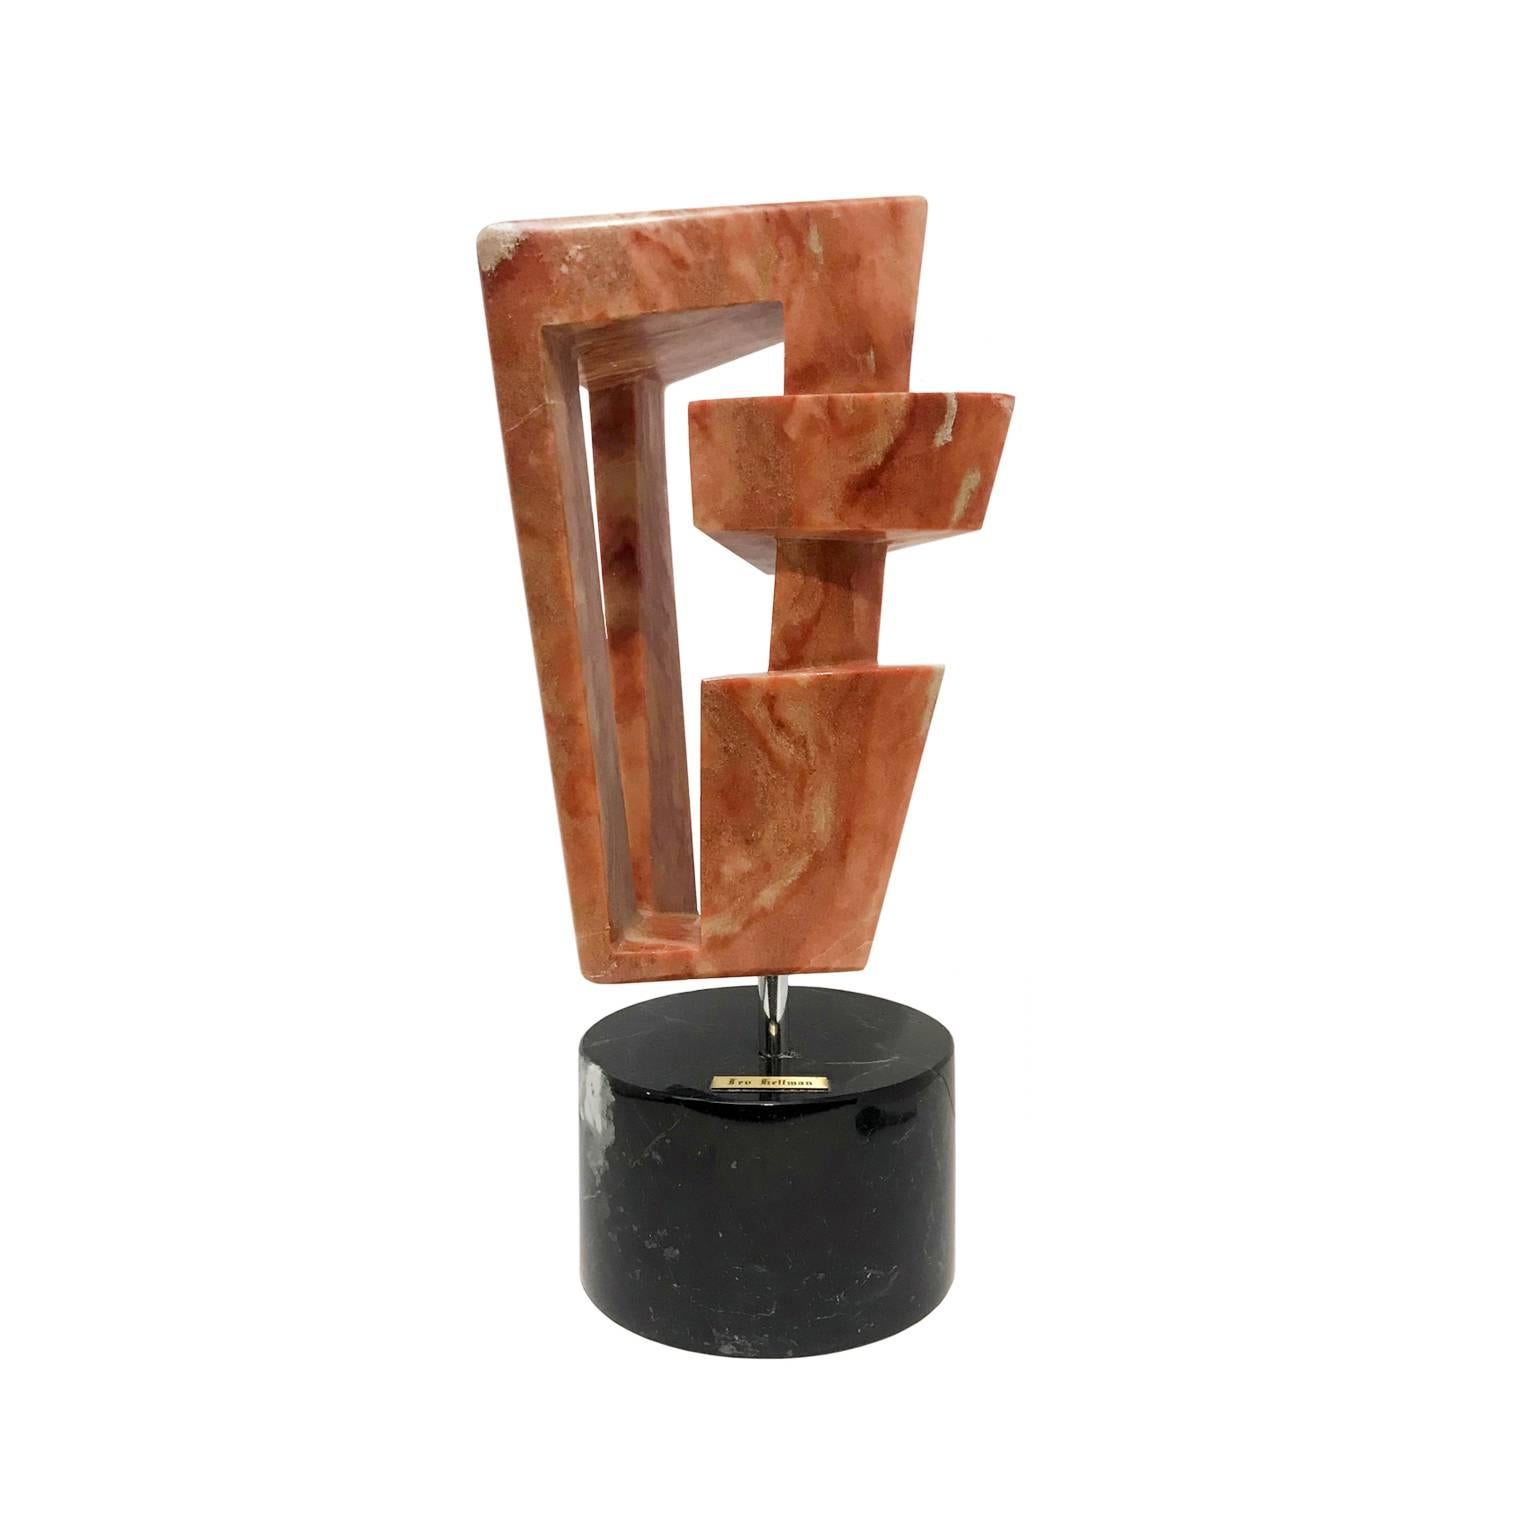 1970s Geometric Coral Marble Sculpture on Marble Base